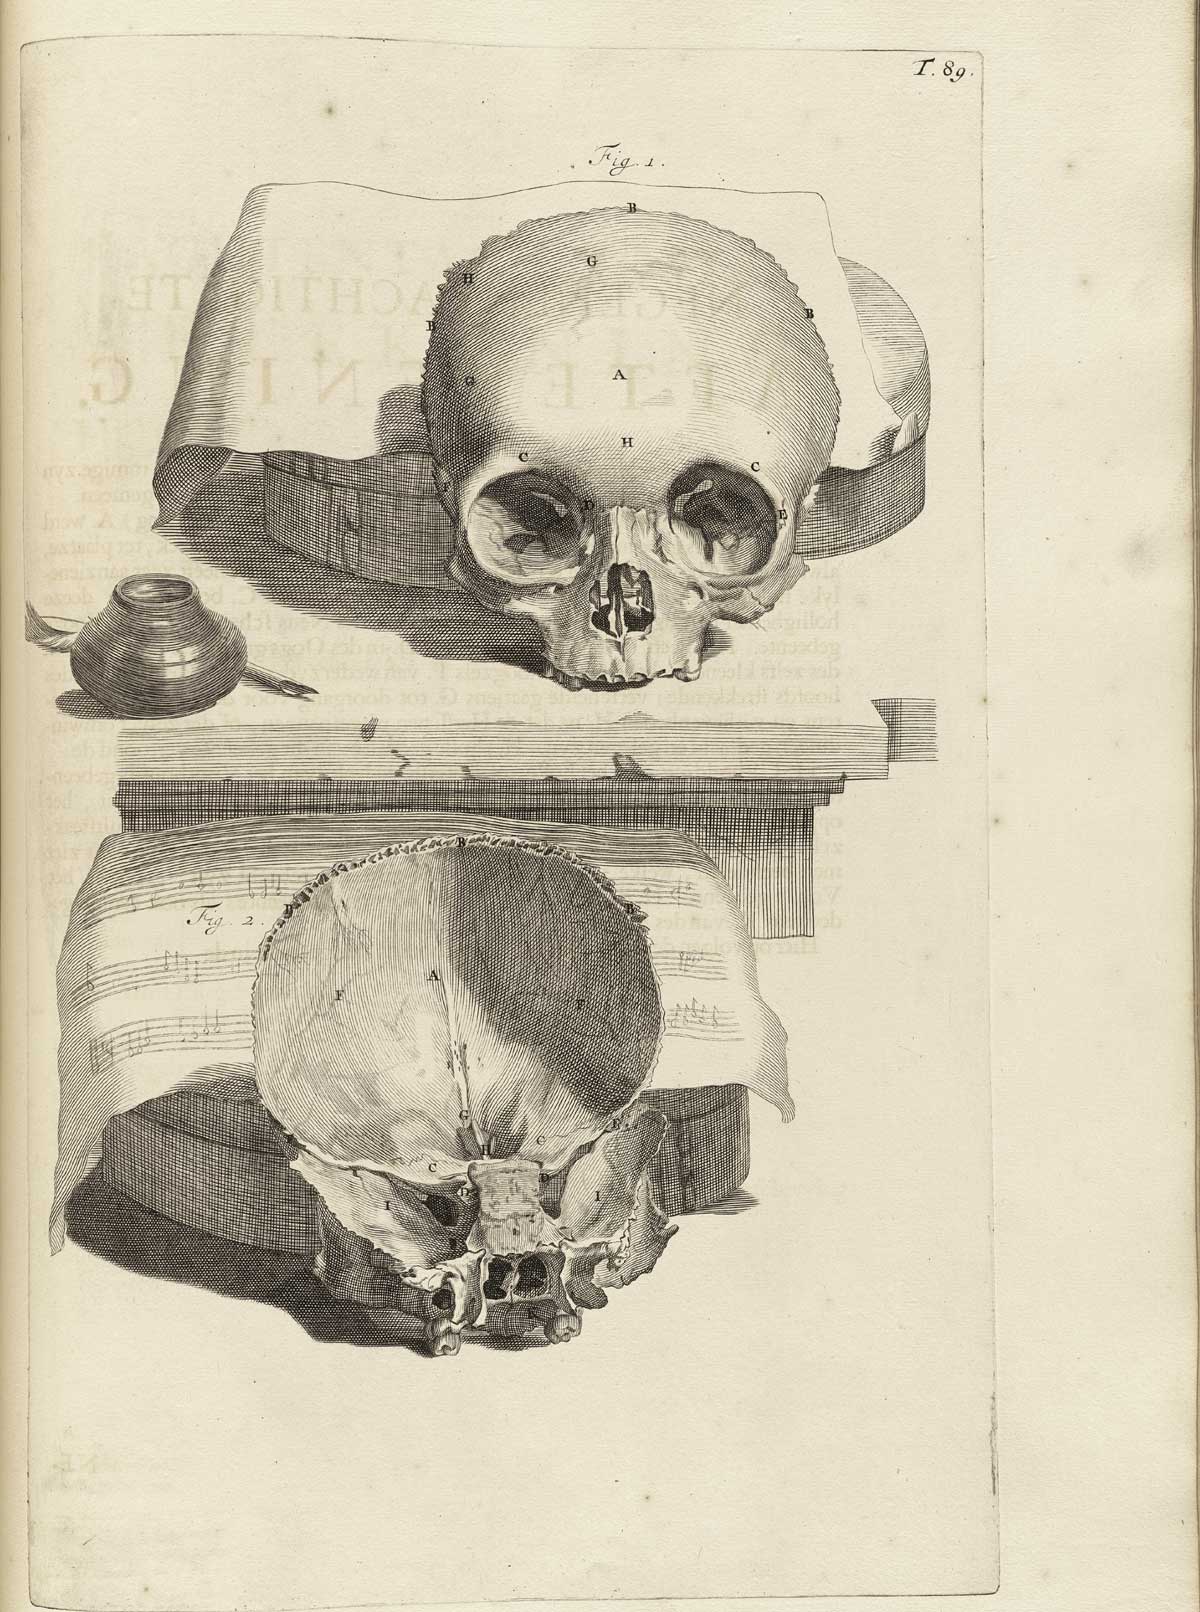 Engraving of a “memento mori” scene of two skull fragments: the first is the frontal bone and maxilla of the skull including forehead, eye sockets, nasal cavities, and upper jaw, facing toward the viewer on top of a writing tablet with a loose sheet of paper behind the skull and an inkwell and pen to the left; in the lower half of the image is the back (parietal bone) of the skull viewed from the inside, including impressions of blood vessels, leaning back against a writing tablet with a manuscript leaf of music laying loose underneath the bones; from Govard Bidloo’s Ontleding Des Menschelyken Lichaams, Amsterdam, 1690, NLM Call no. WZ 250 B5855anDu 1690.